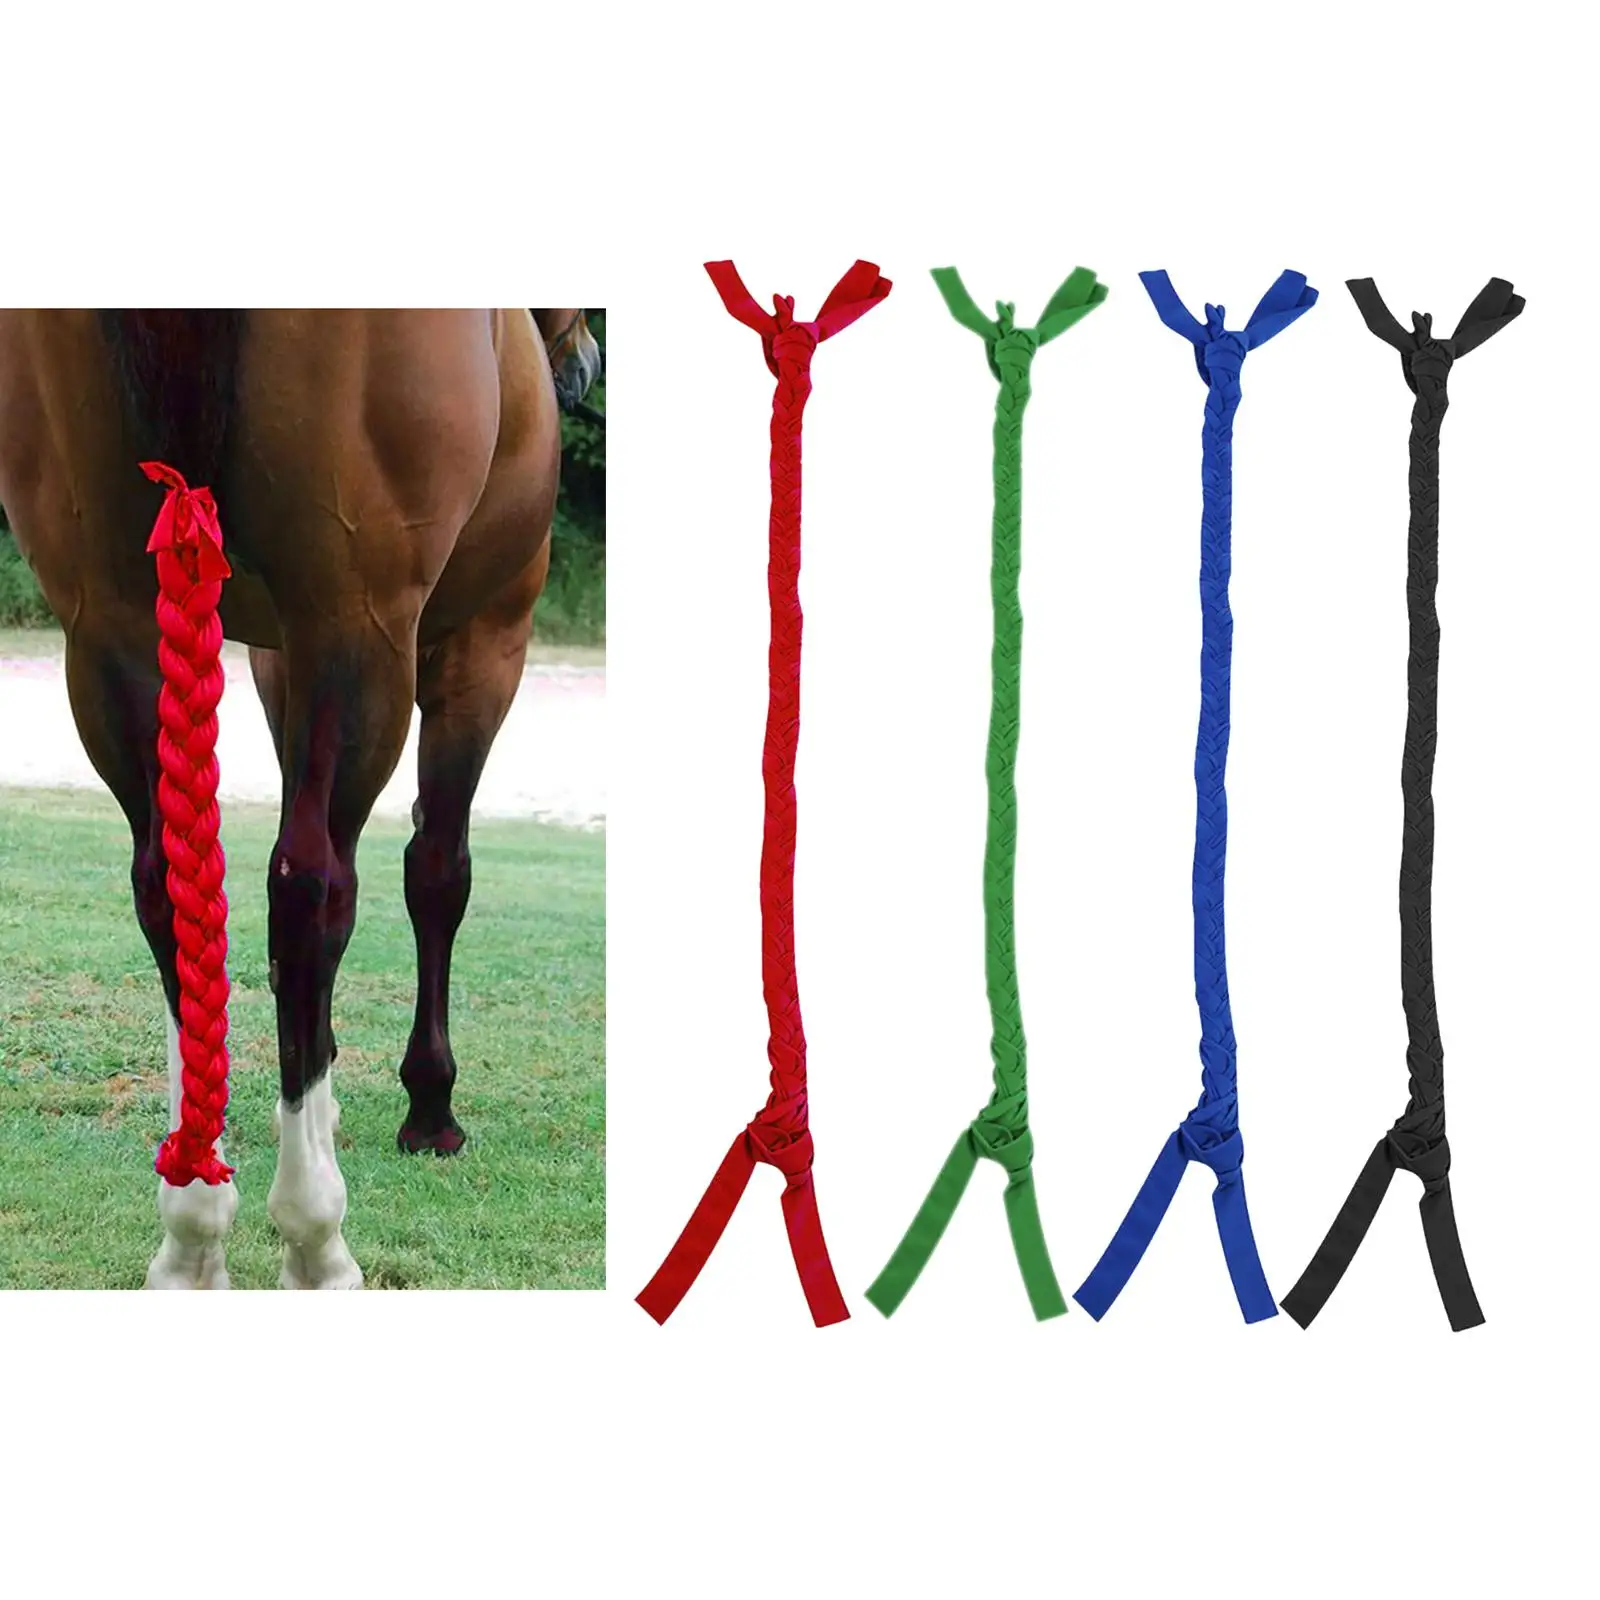 Guard Tail Wrap Tail Decoration Equestrian Equipment